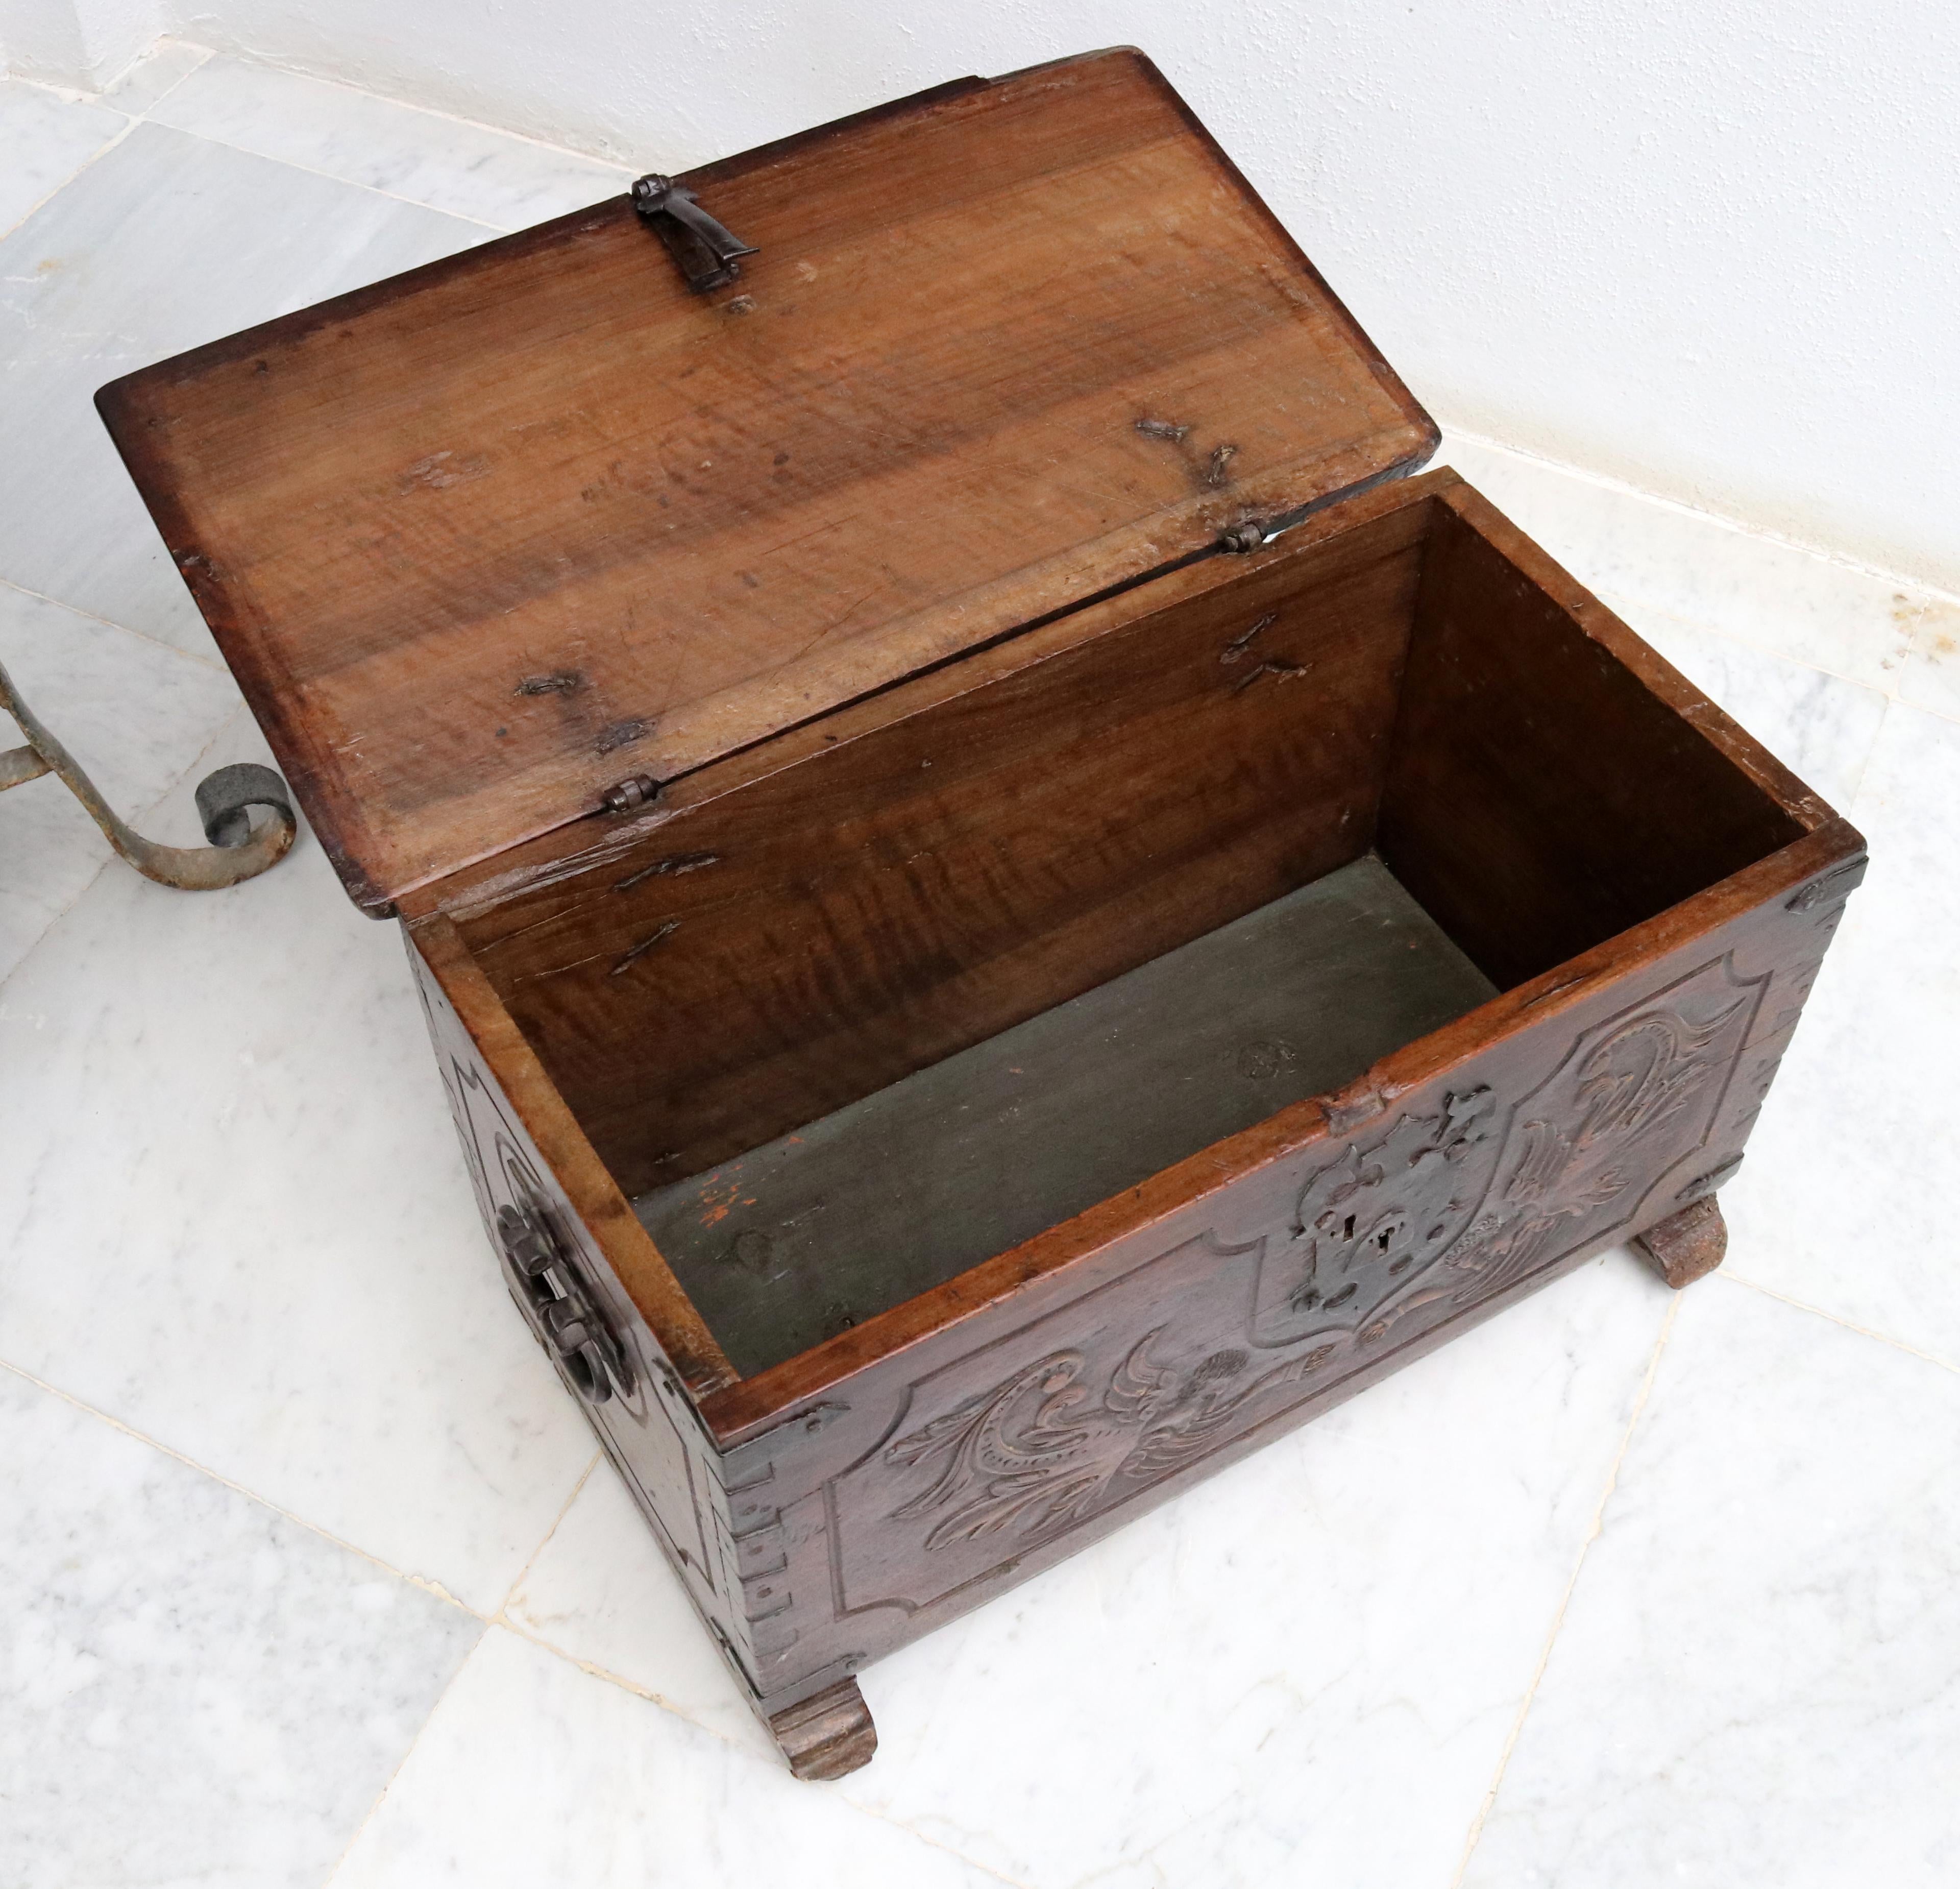 South American 18th Century Colonial Wooden Chest with Relief Carvings and Iron Fittings For Sale